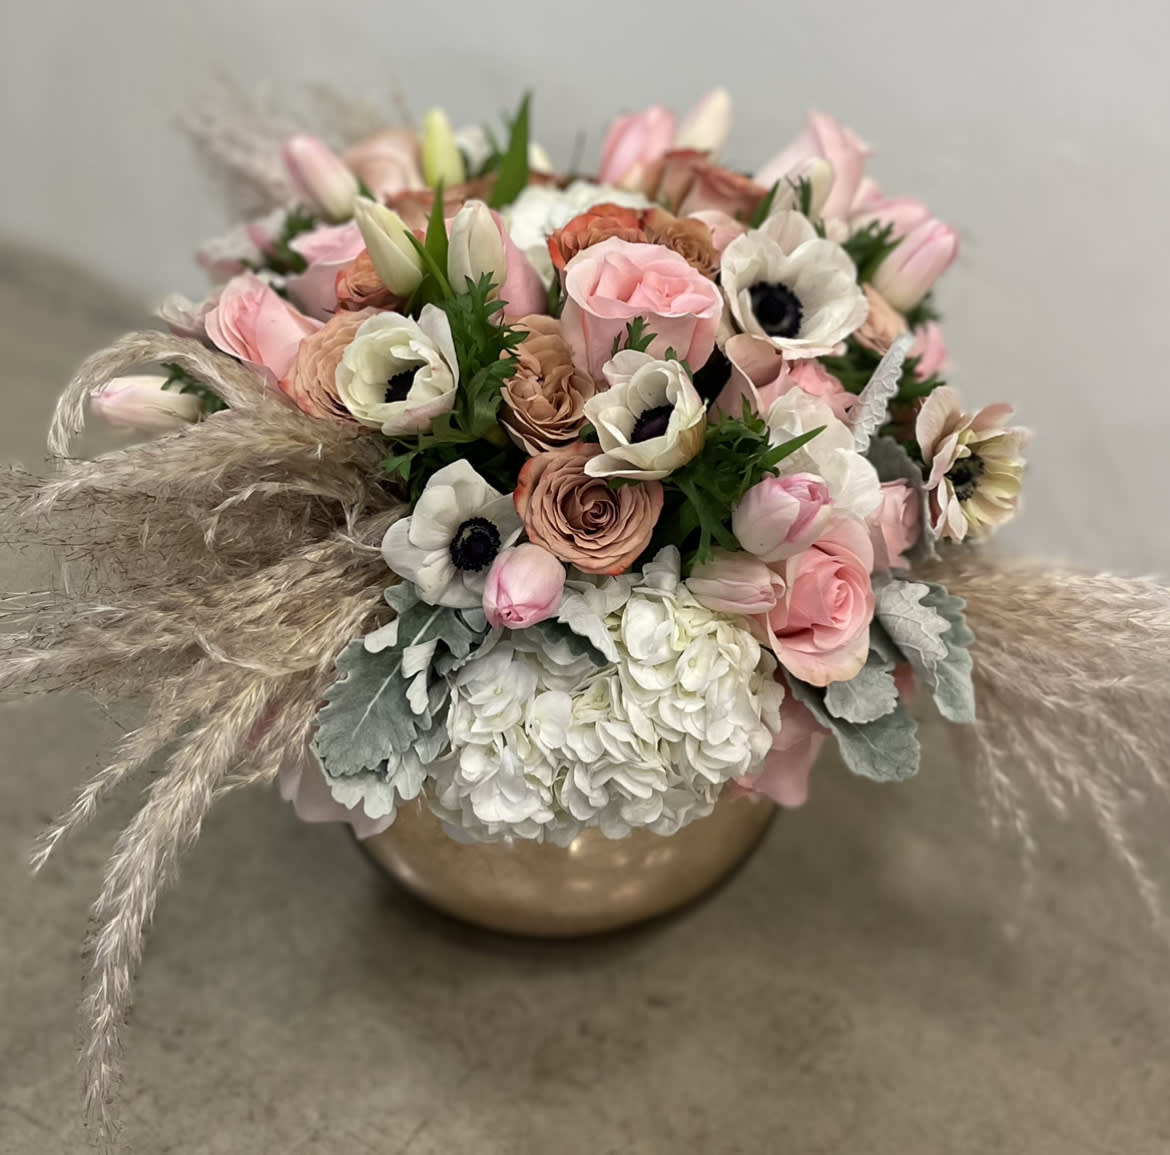 Emma - A muted pallete of roses, tulips, hydrangeas, anemones, dusty miller and pampas grass in a rose gold glass vase in 8&quot;D. Arrangement stands approximately 12&quot; high